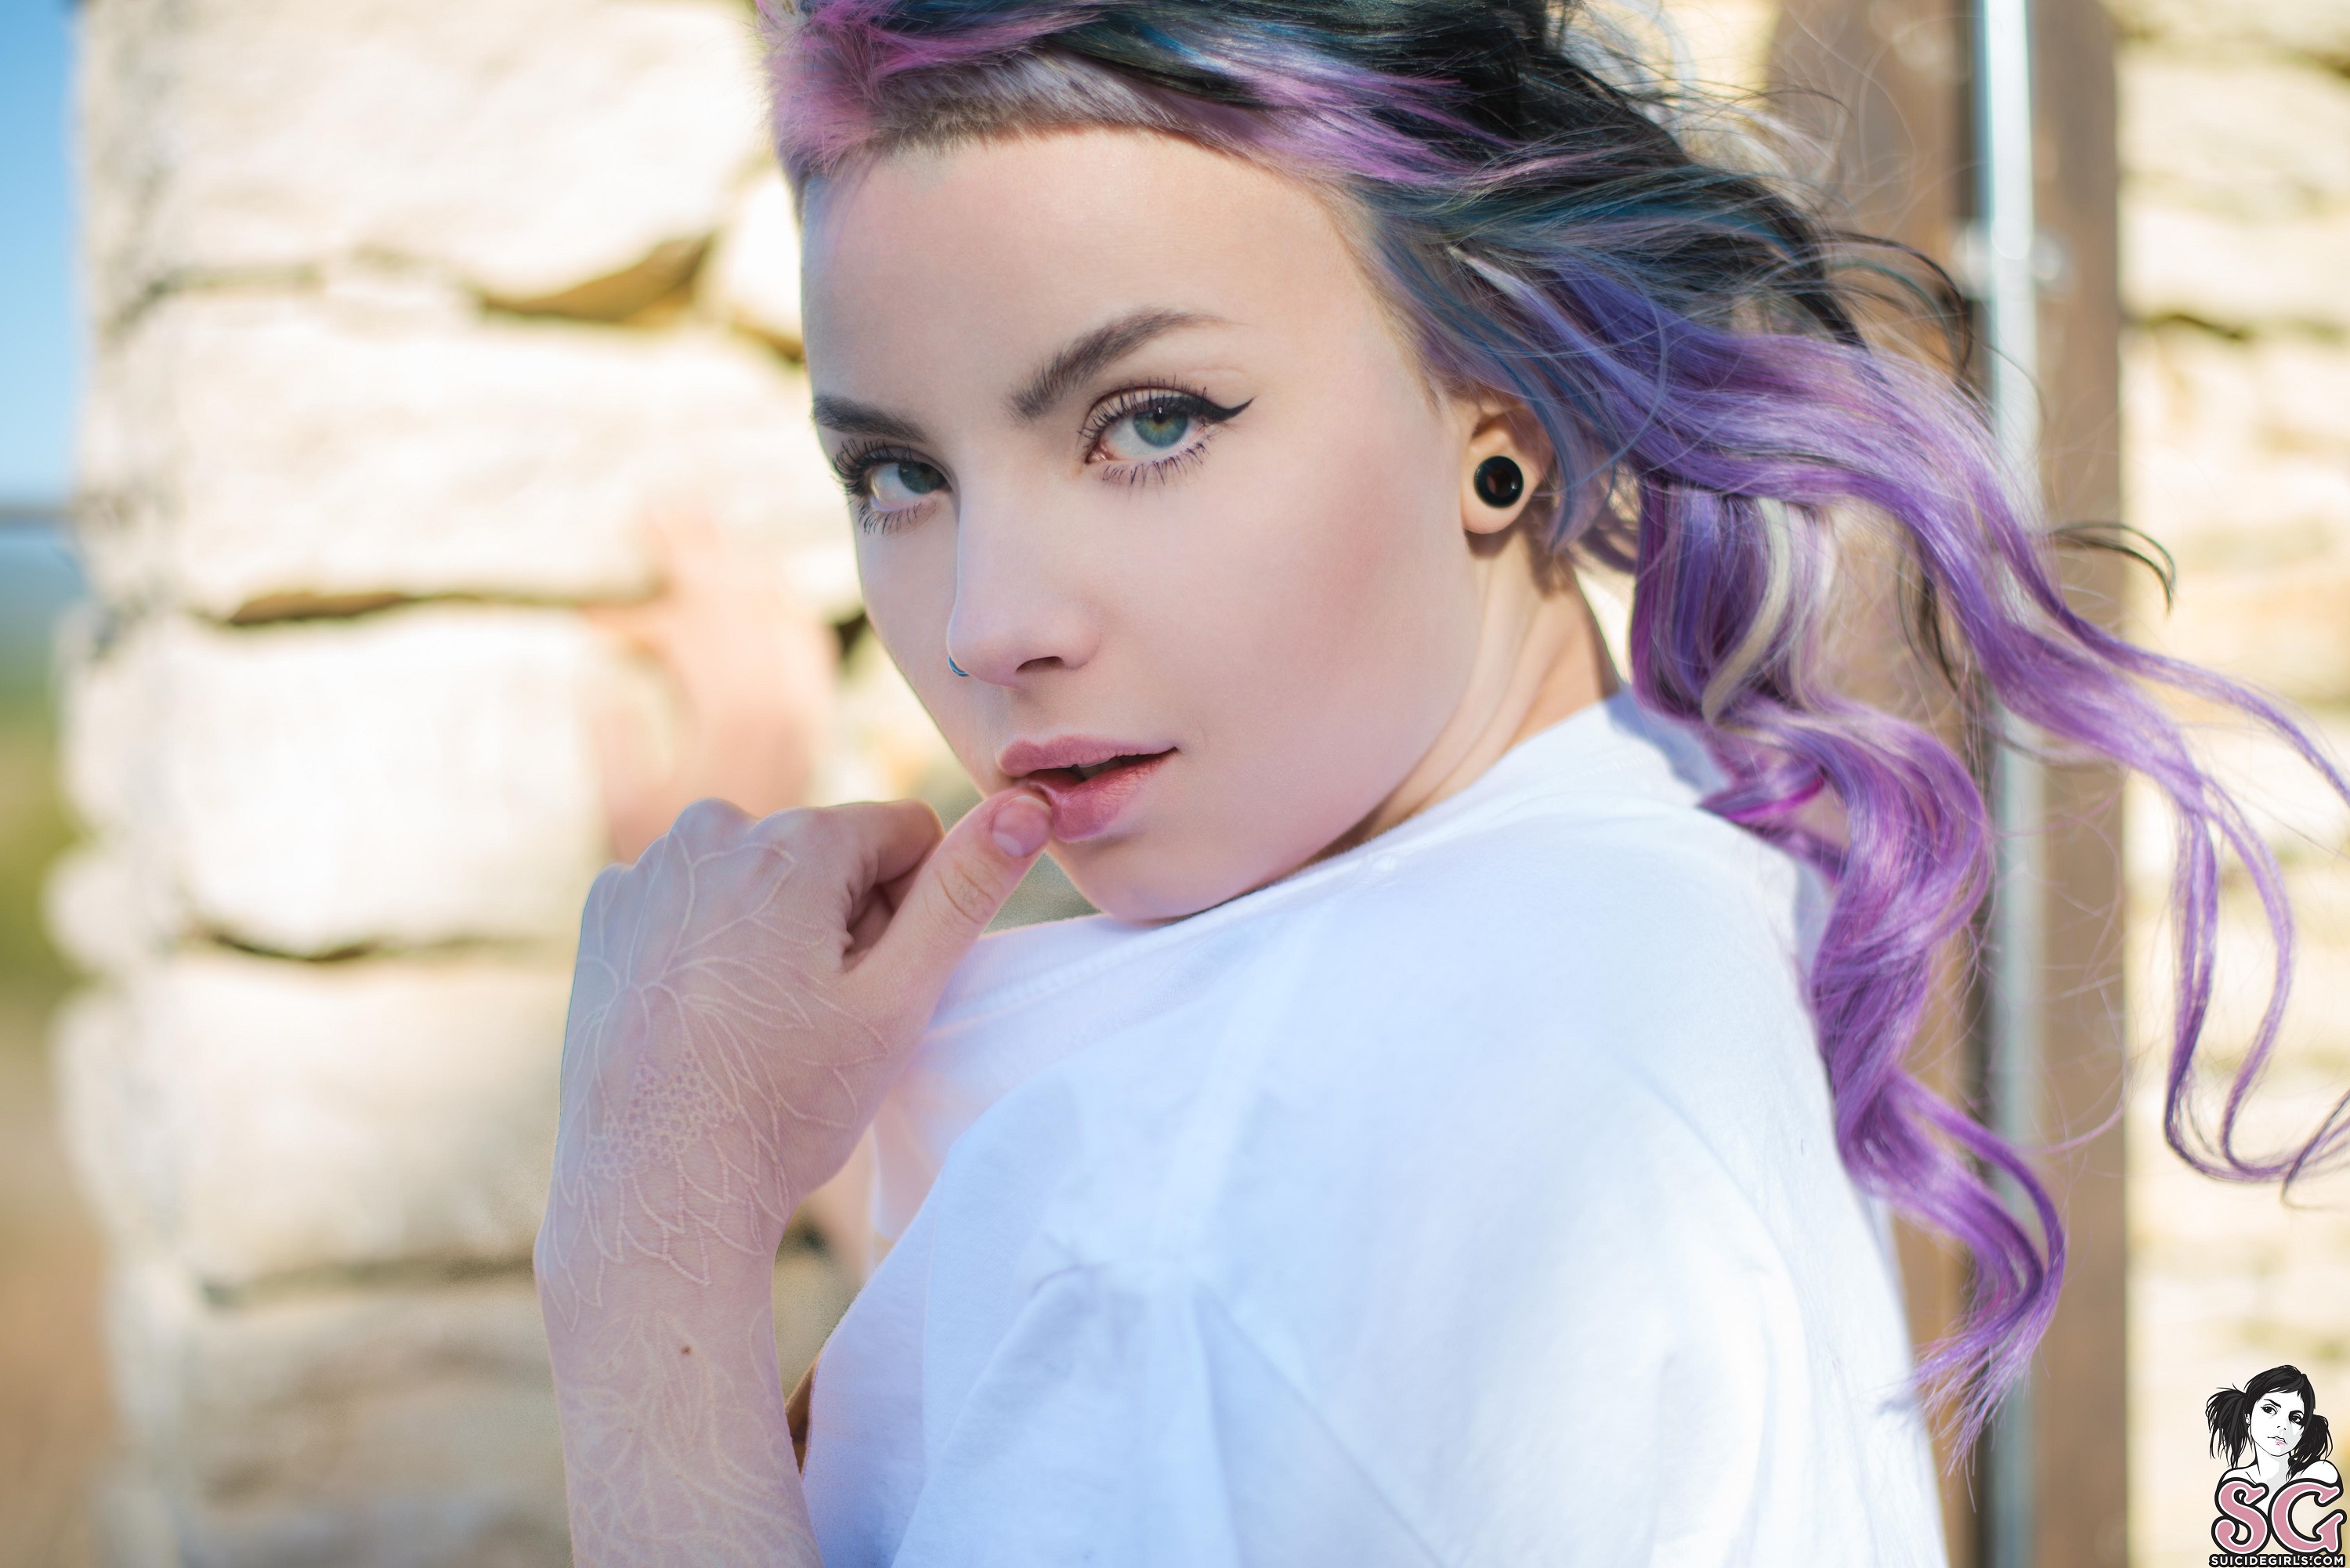 Women Model Dyed Hair Looking At Viewer Nose Rings Face Portrait Outdoors Depth Of Field Finger On L 3000x2002